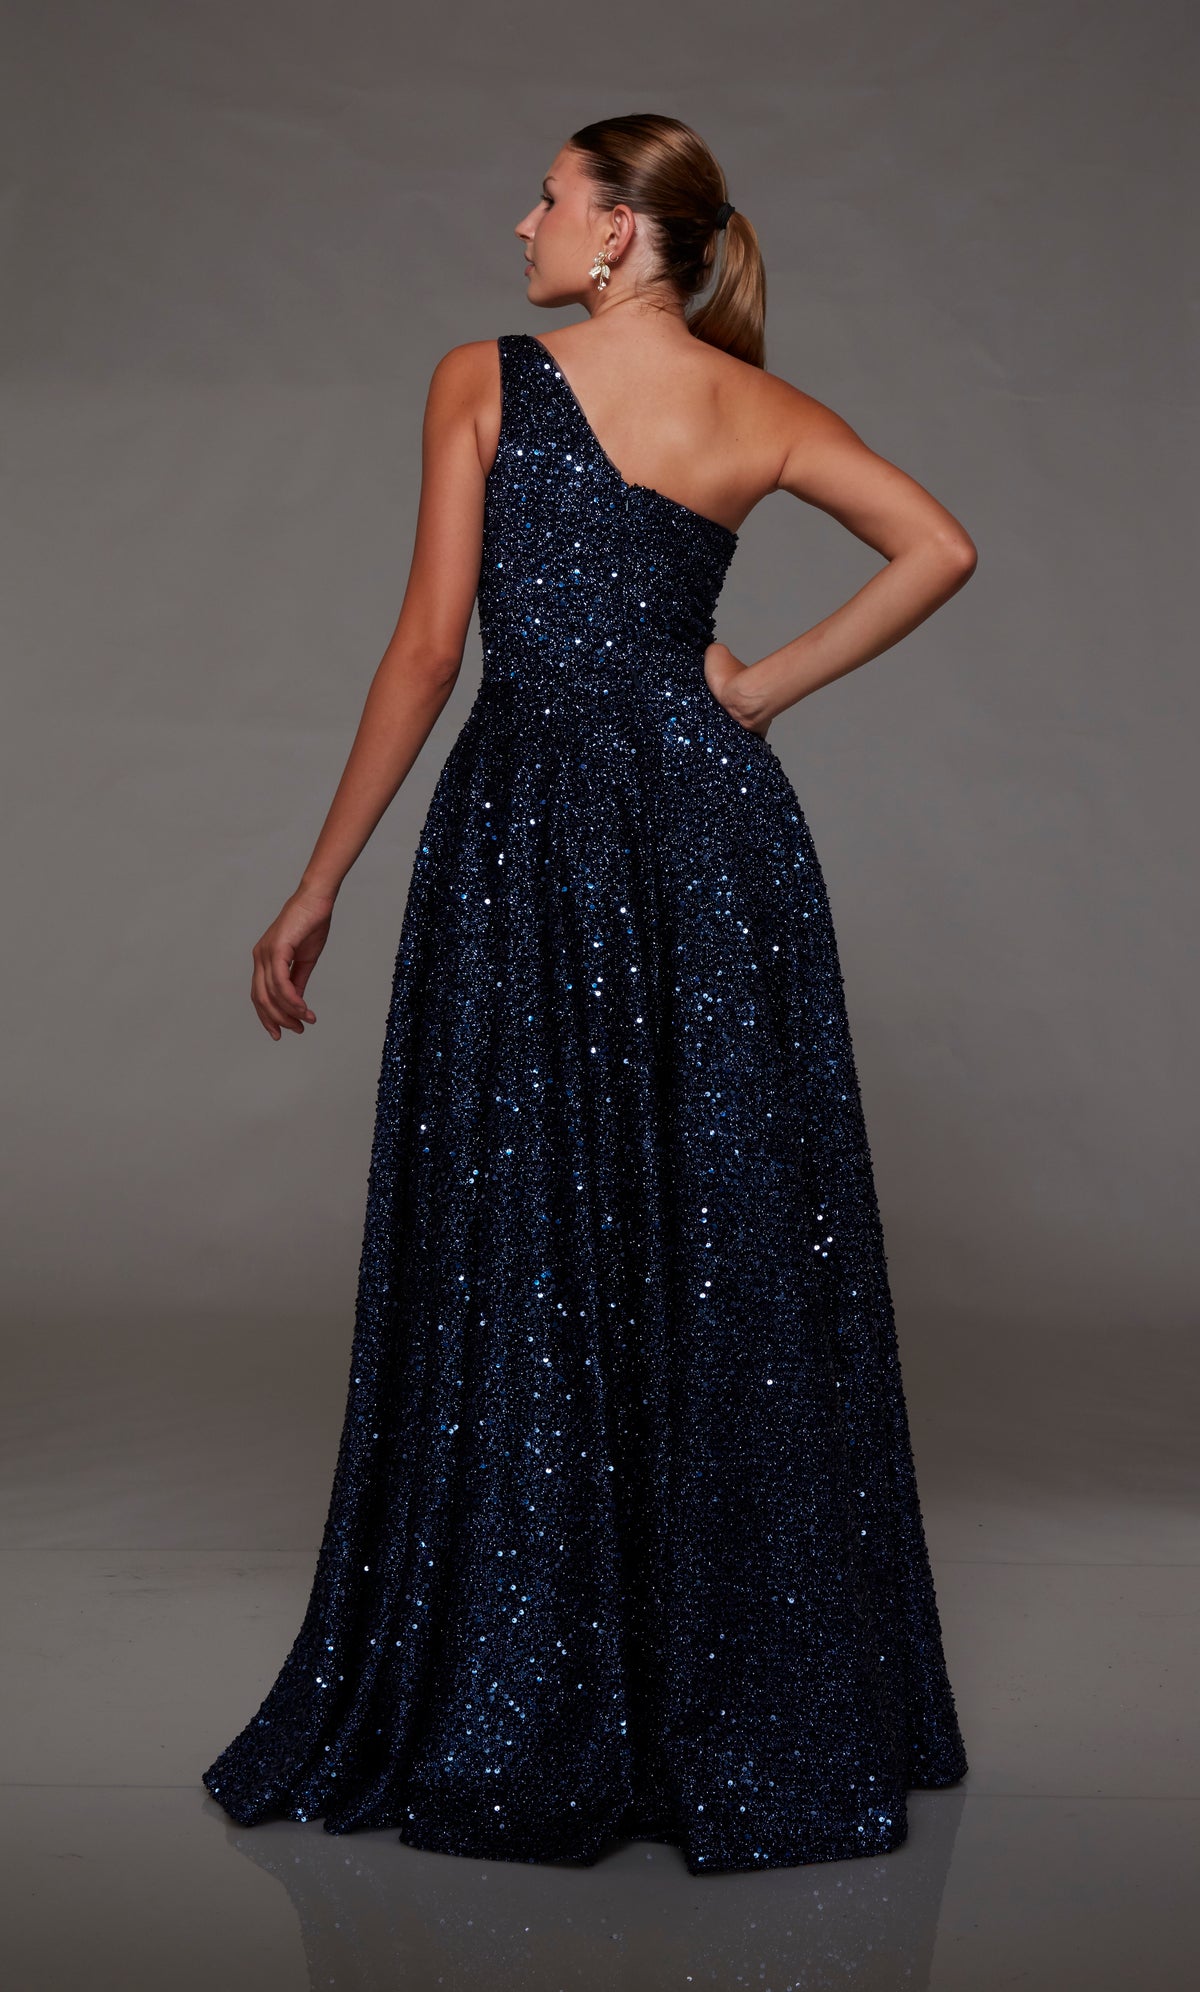 Elegant navy blue one-shoulder gown: High slit, zip-up back, and an slight train in sparkly iridescent sequin fabrication for an glamorous and sophisticated look.